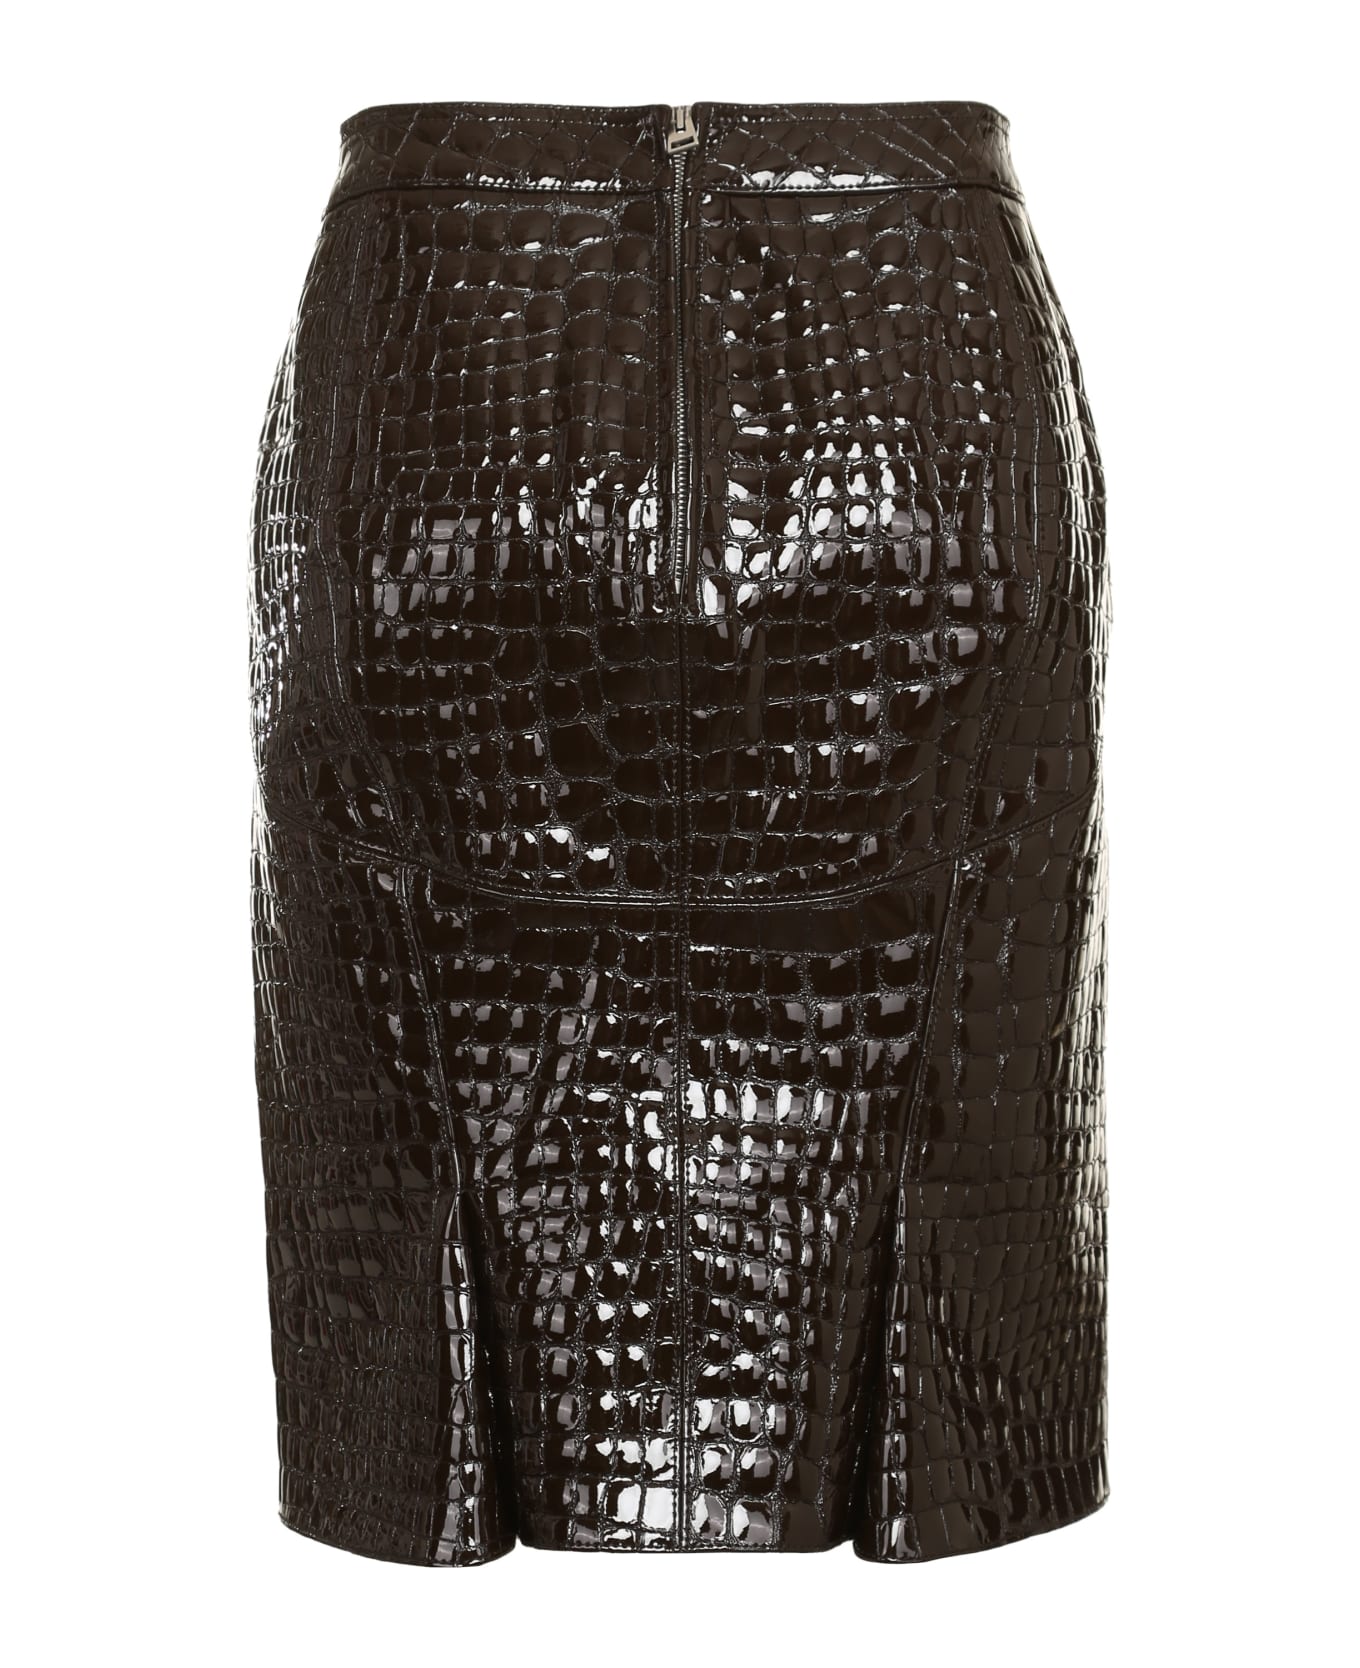 Tom Ford Leather Skirt - brown スカート